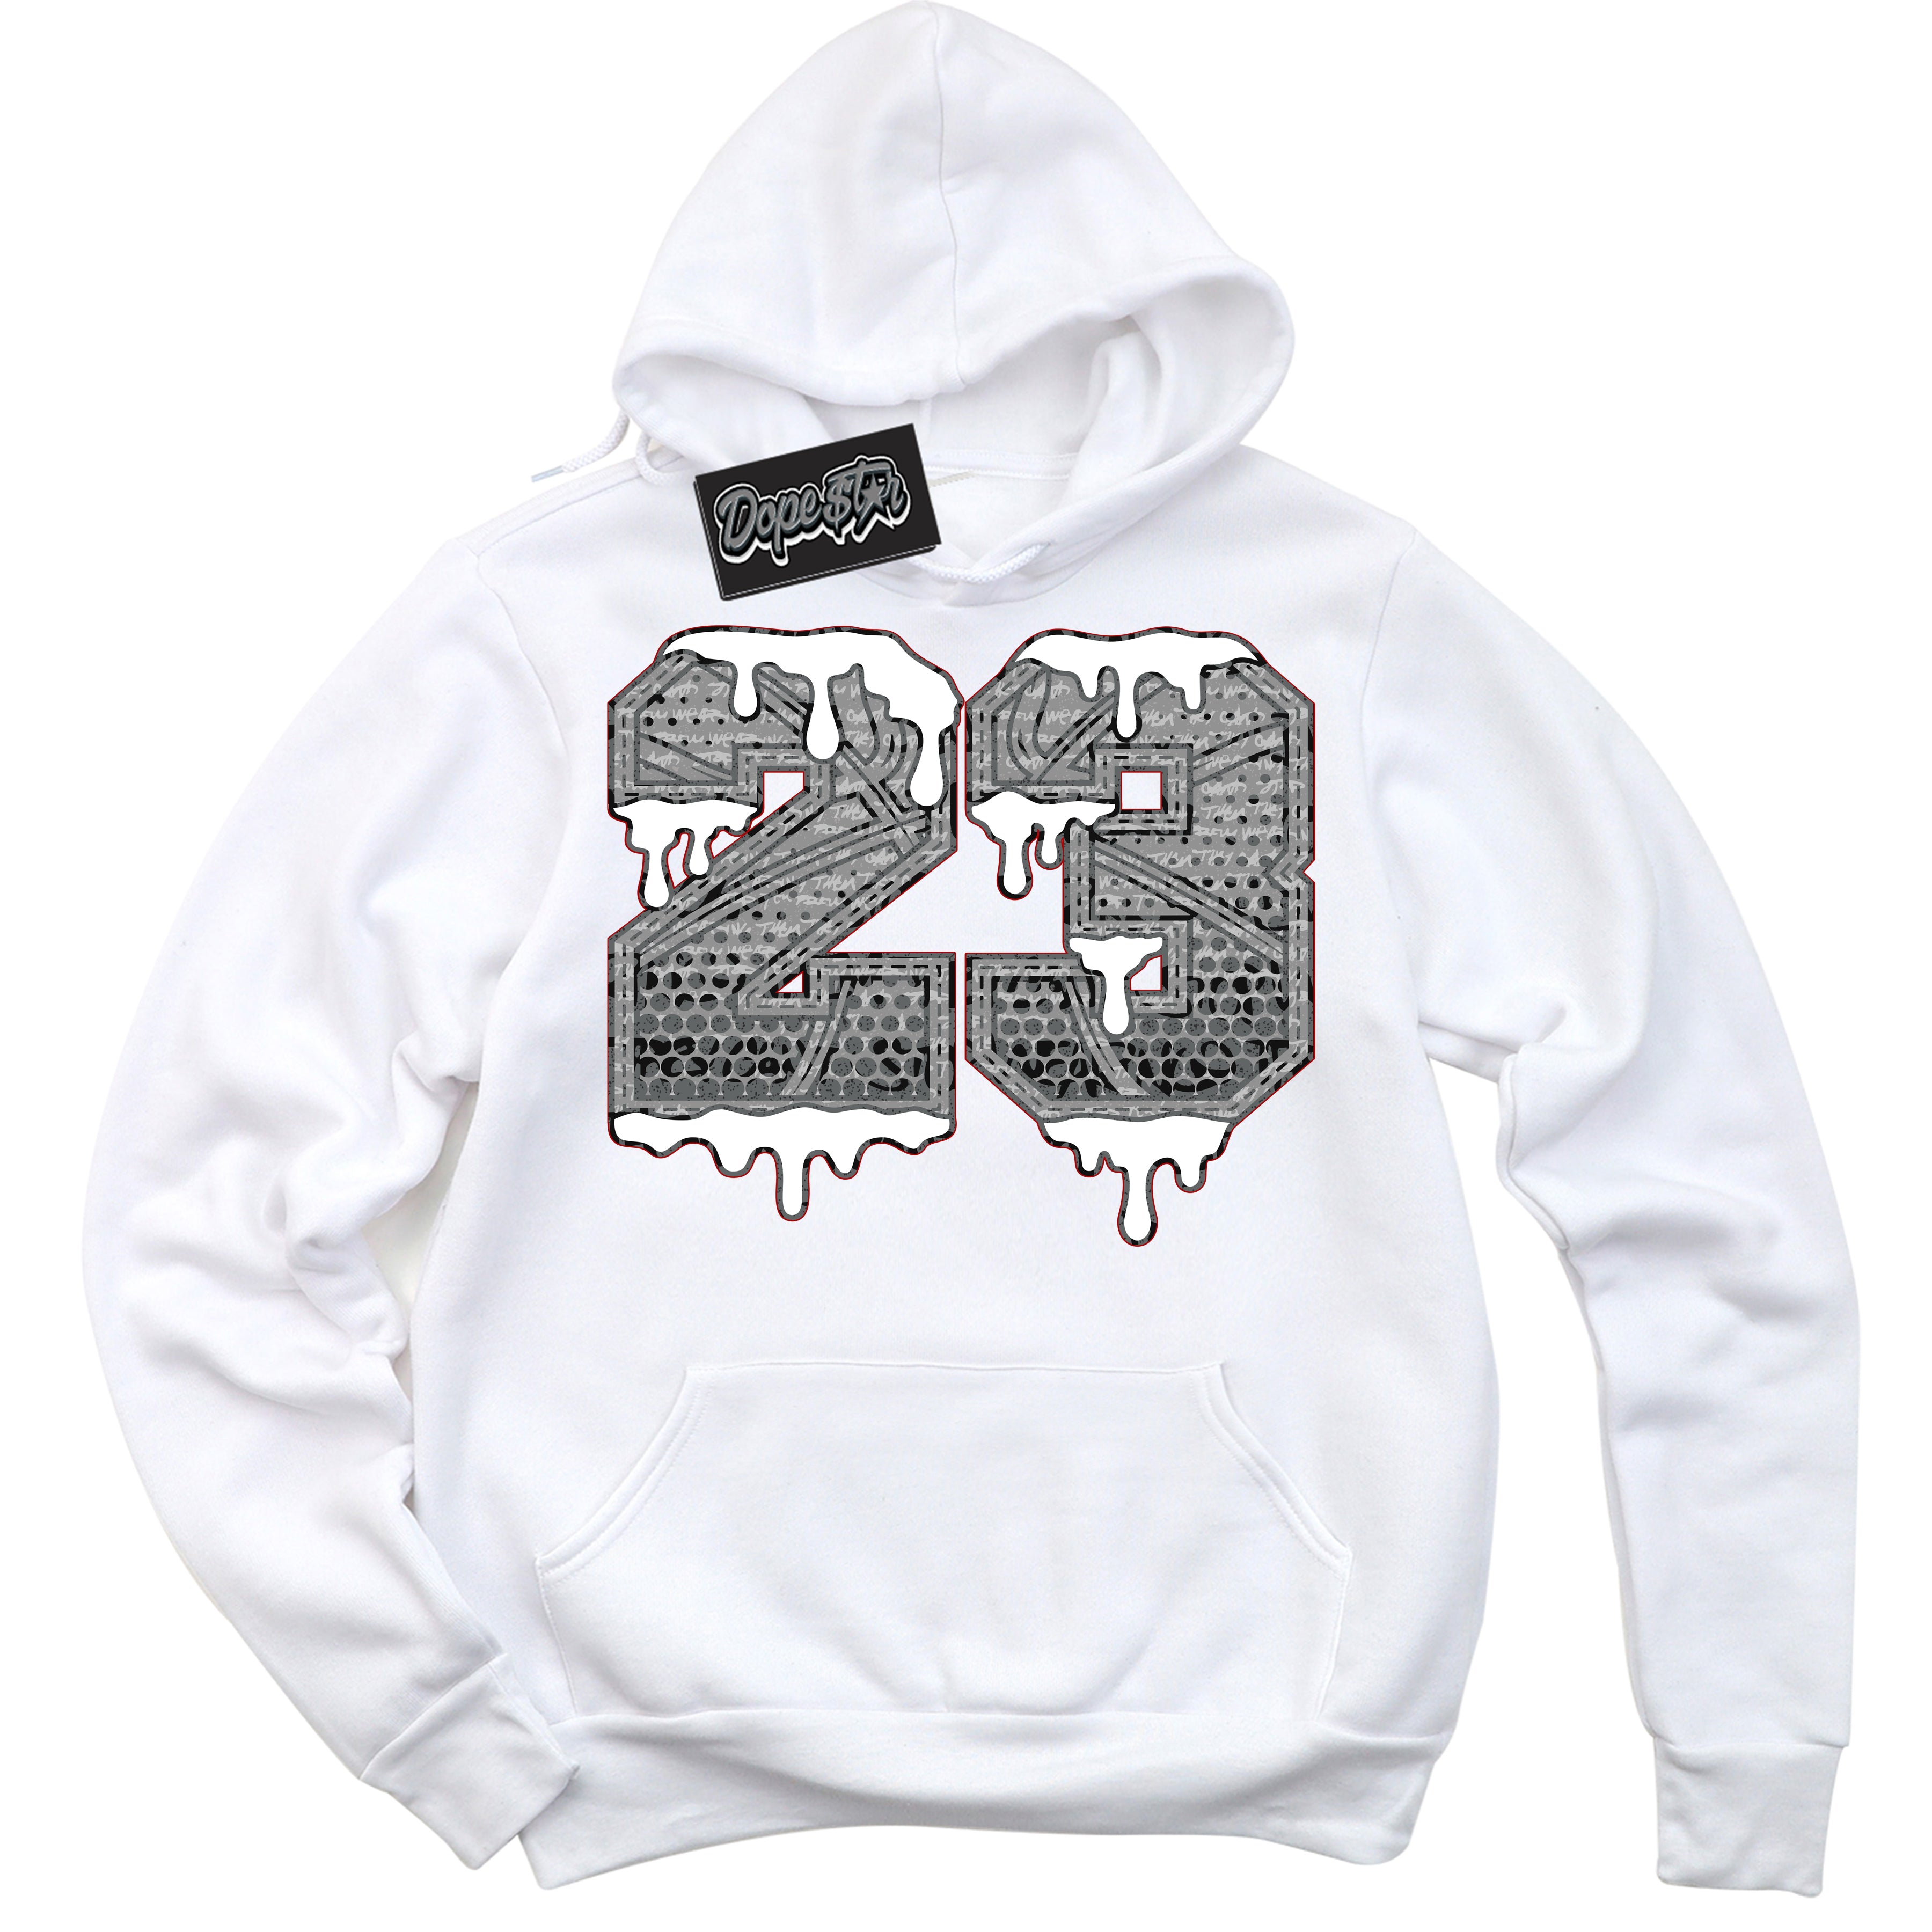 Cool White Hoodie with “ 23 Ball ”  design that Perfectly Matches Rebellionaire 1s Sneakers.